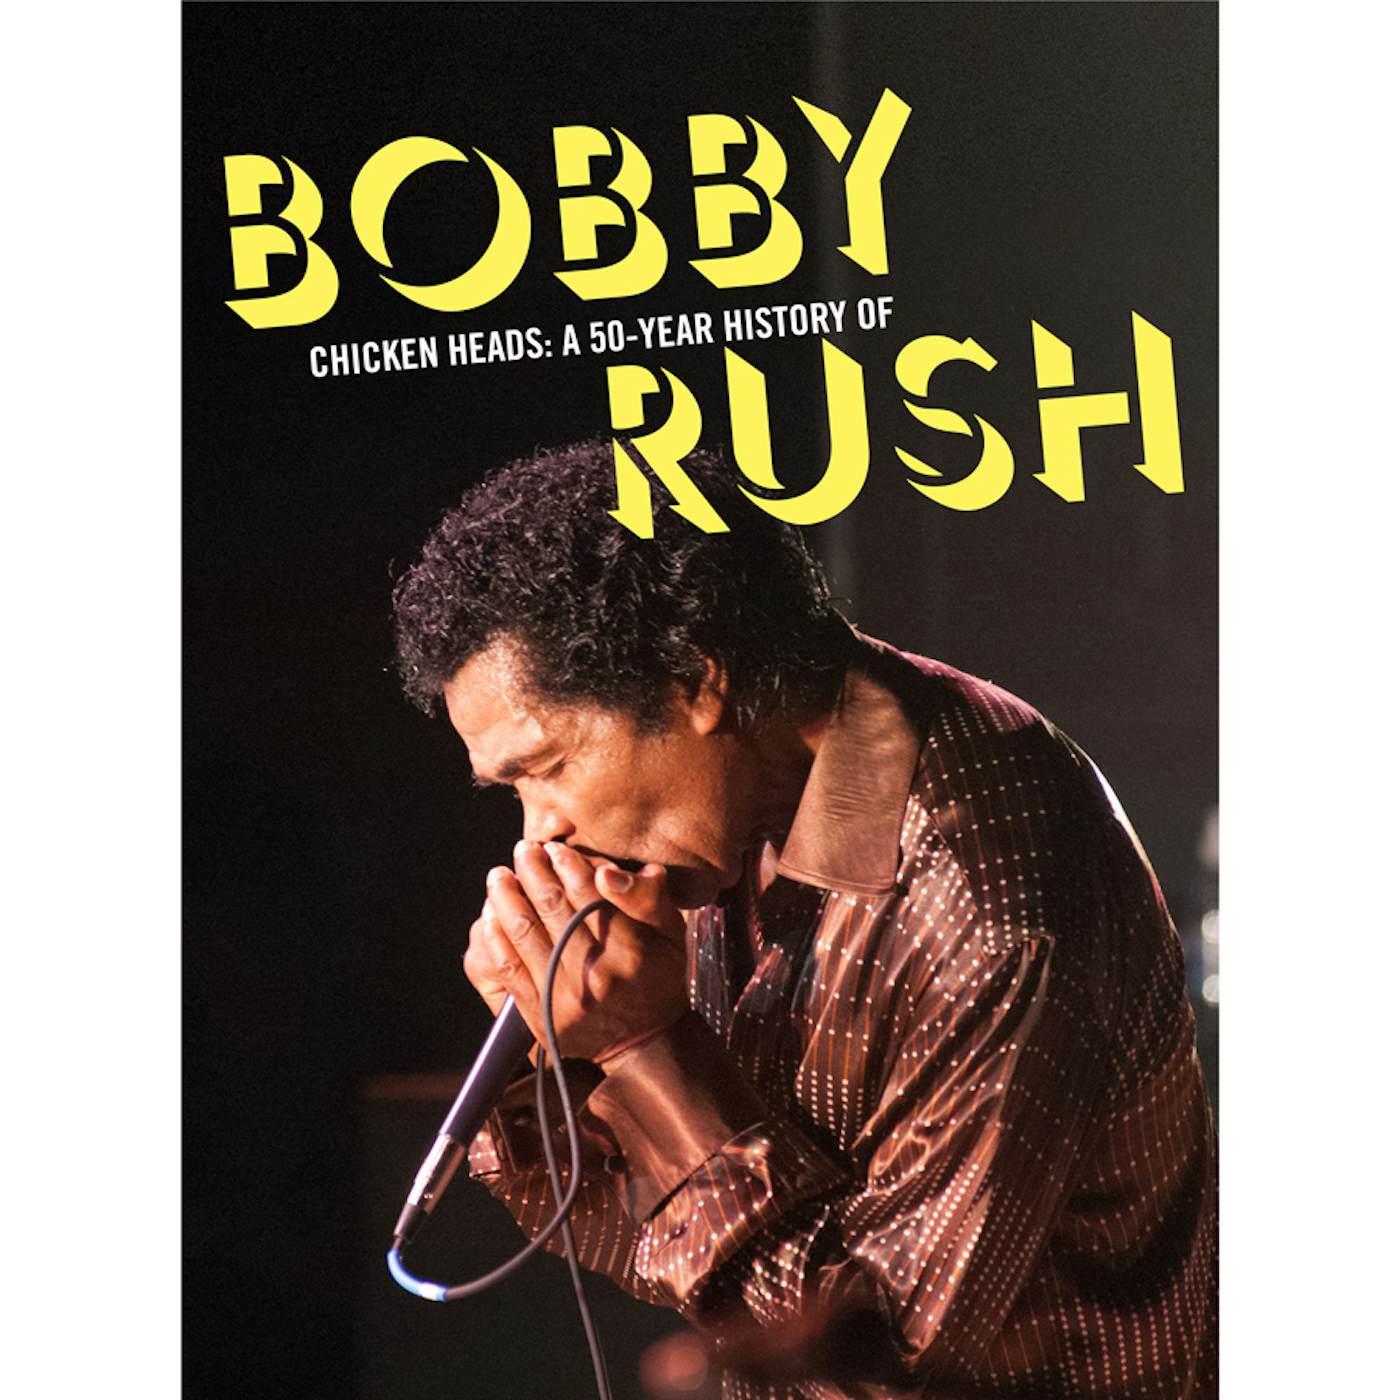 CHICKEN HEADS: A 50 YEAR HISTORY OF BOBBY RUSH CD